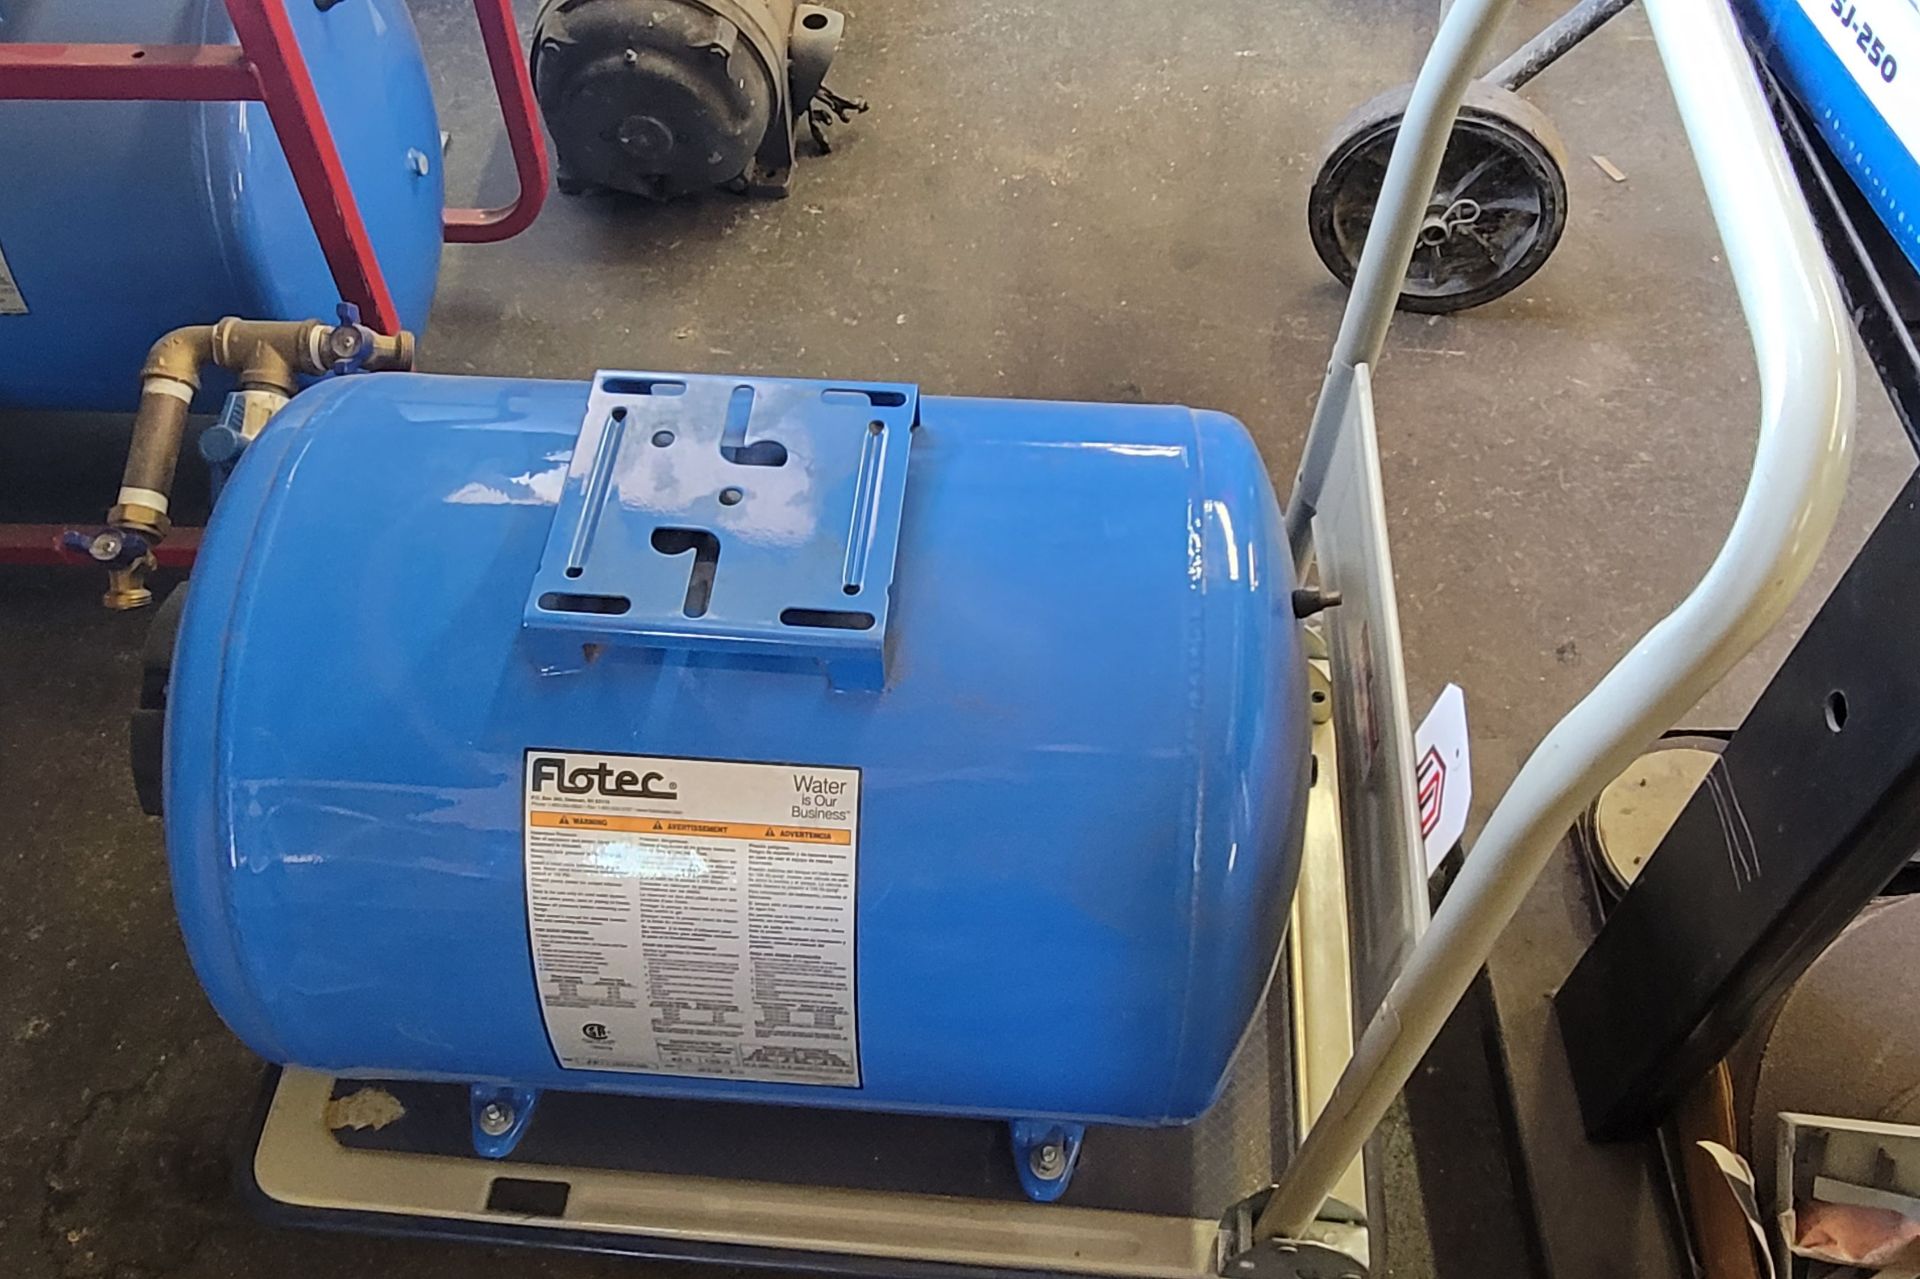 FLOTEC 42-GALLON PRESSURE TANK MOUNTED TO DOLLY, MODEL FP7110TH-09 - Image 2 of 2